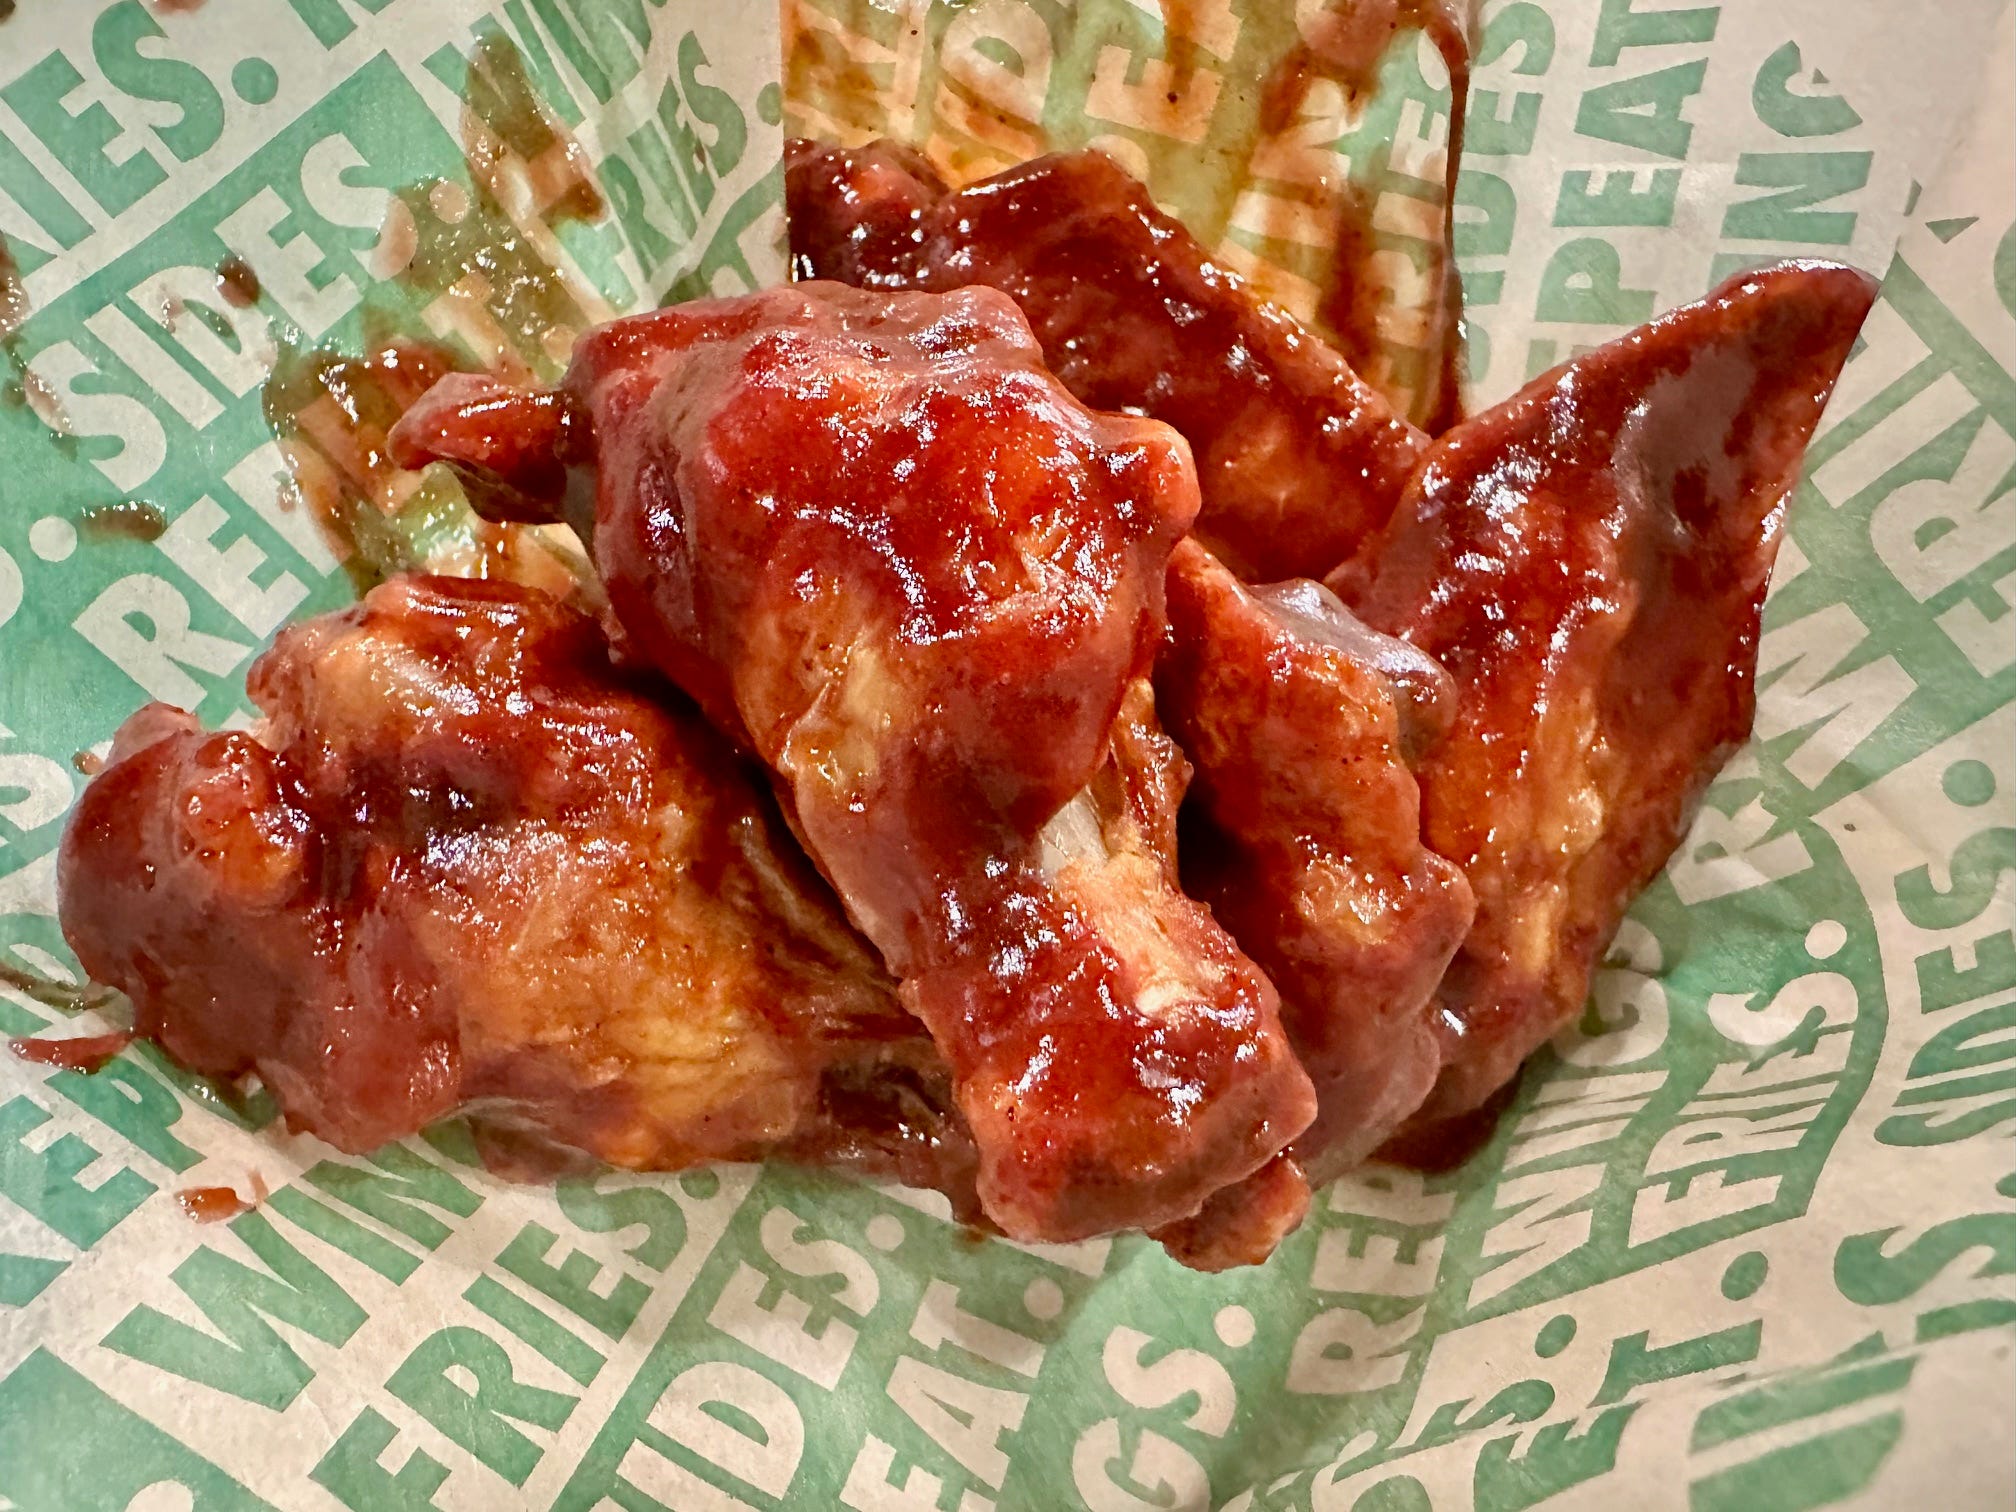 Wingstop's Hickory Smoked BBQ Wings